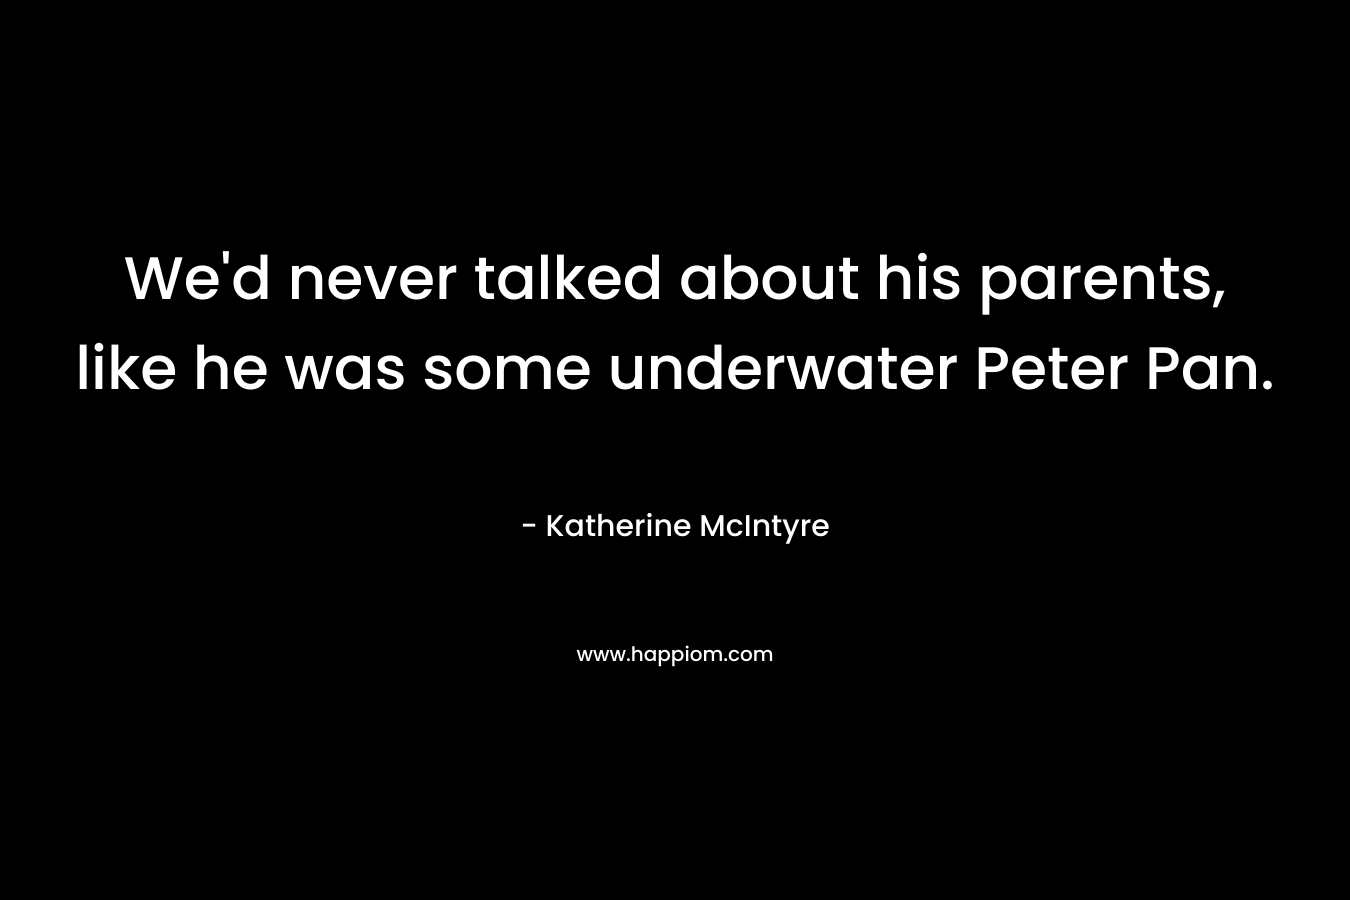 We’d never talked about his parents, like he was some underwater Peter Pan. – Katherine McIntyre